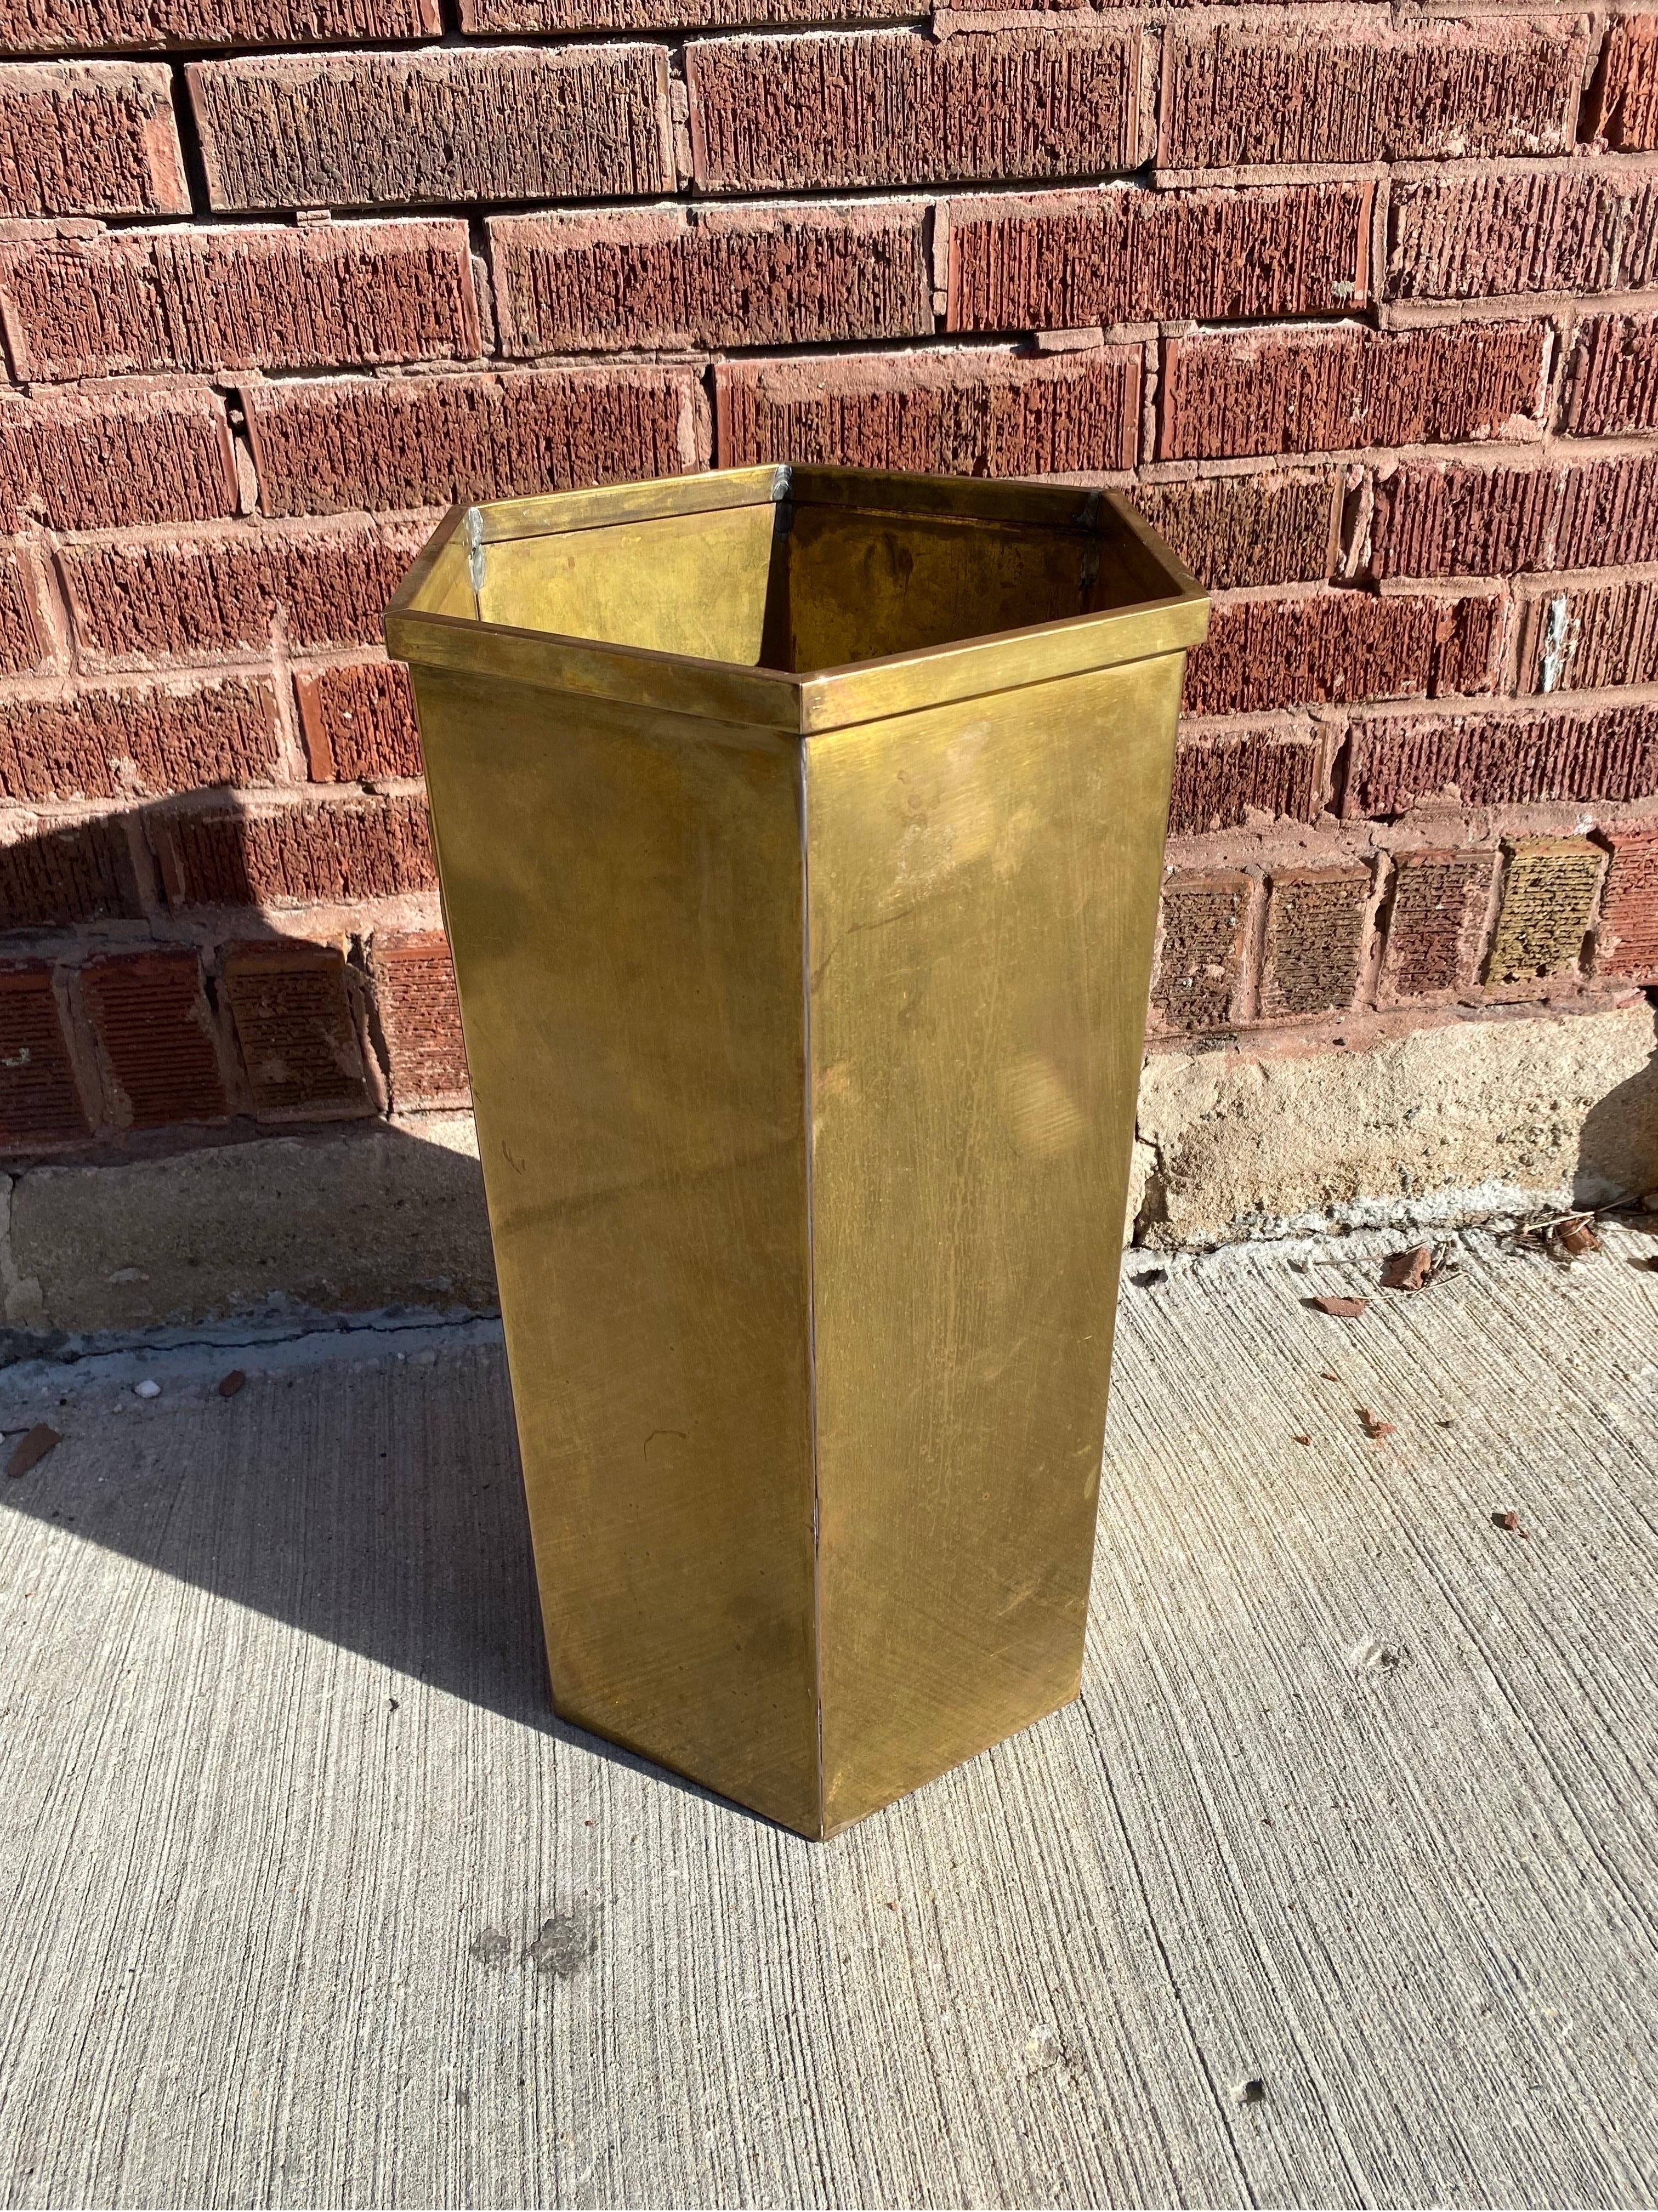 Antique Bronze Umbrella Stand
This antique bronze bin can have multiple uses in your home or office. From umbrella stand to wastepaper bin this antique will elevate your space with bronze warmth. 

Circa Early 20th Century

Dimensions:

W 9”
D